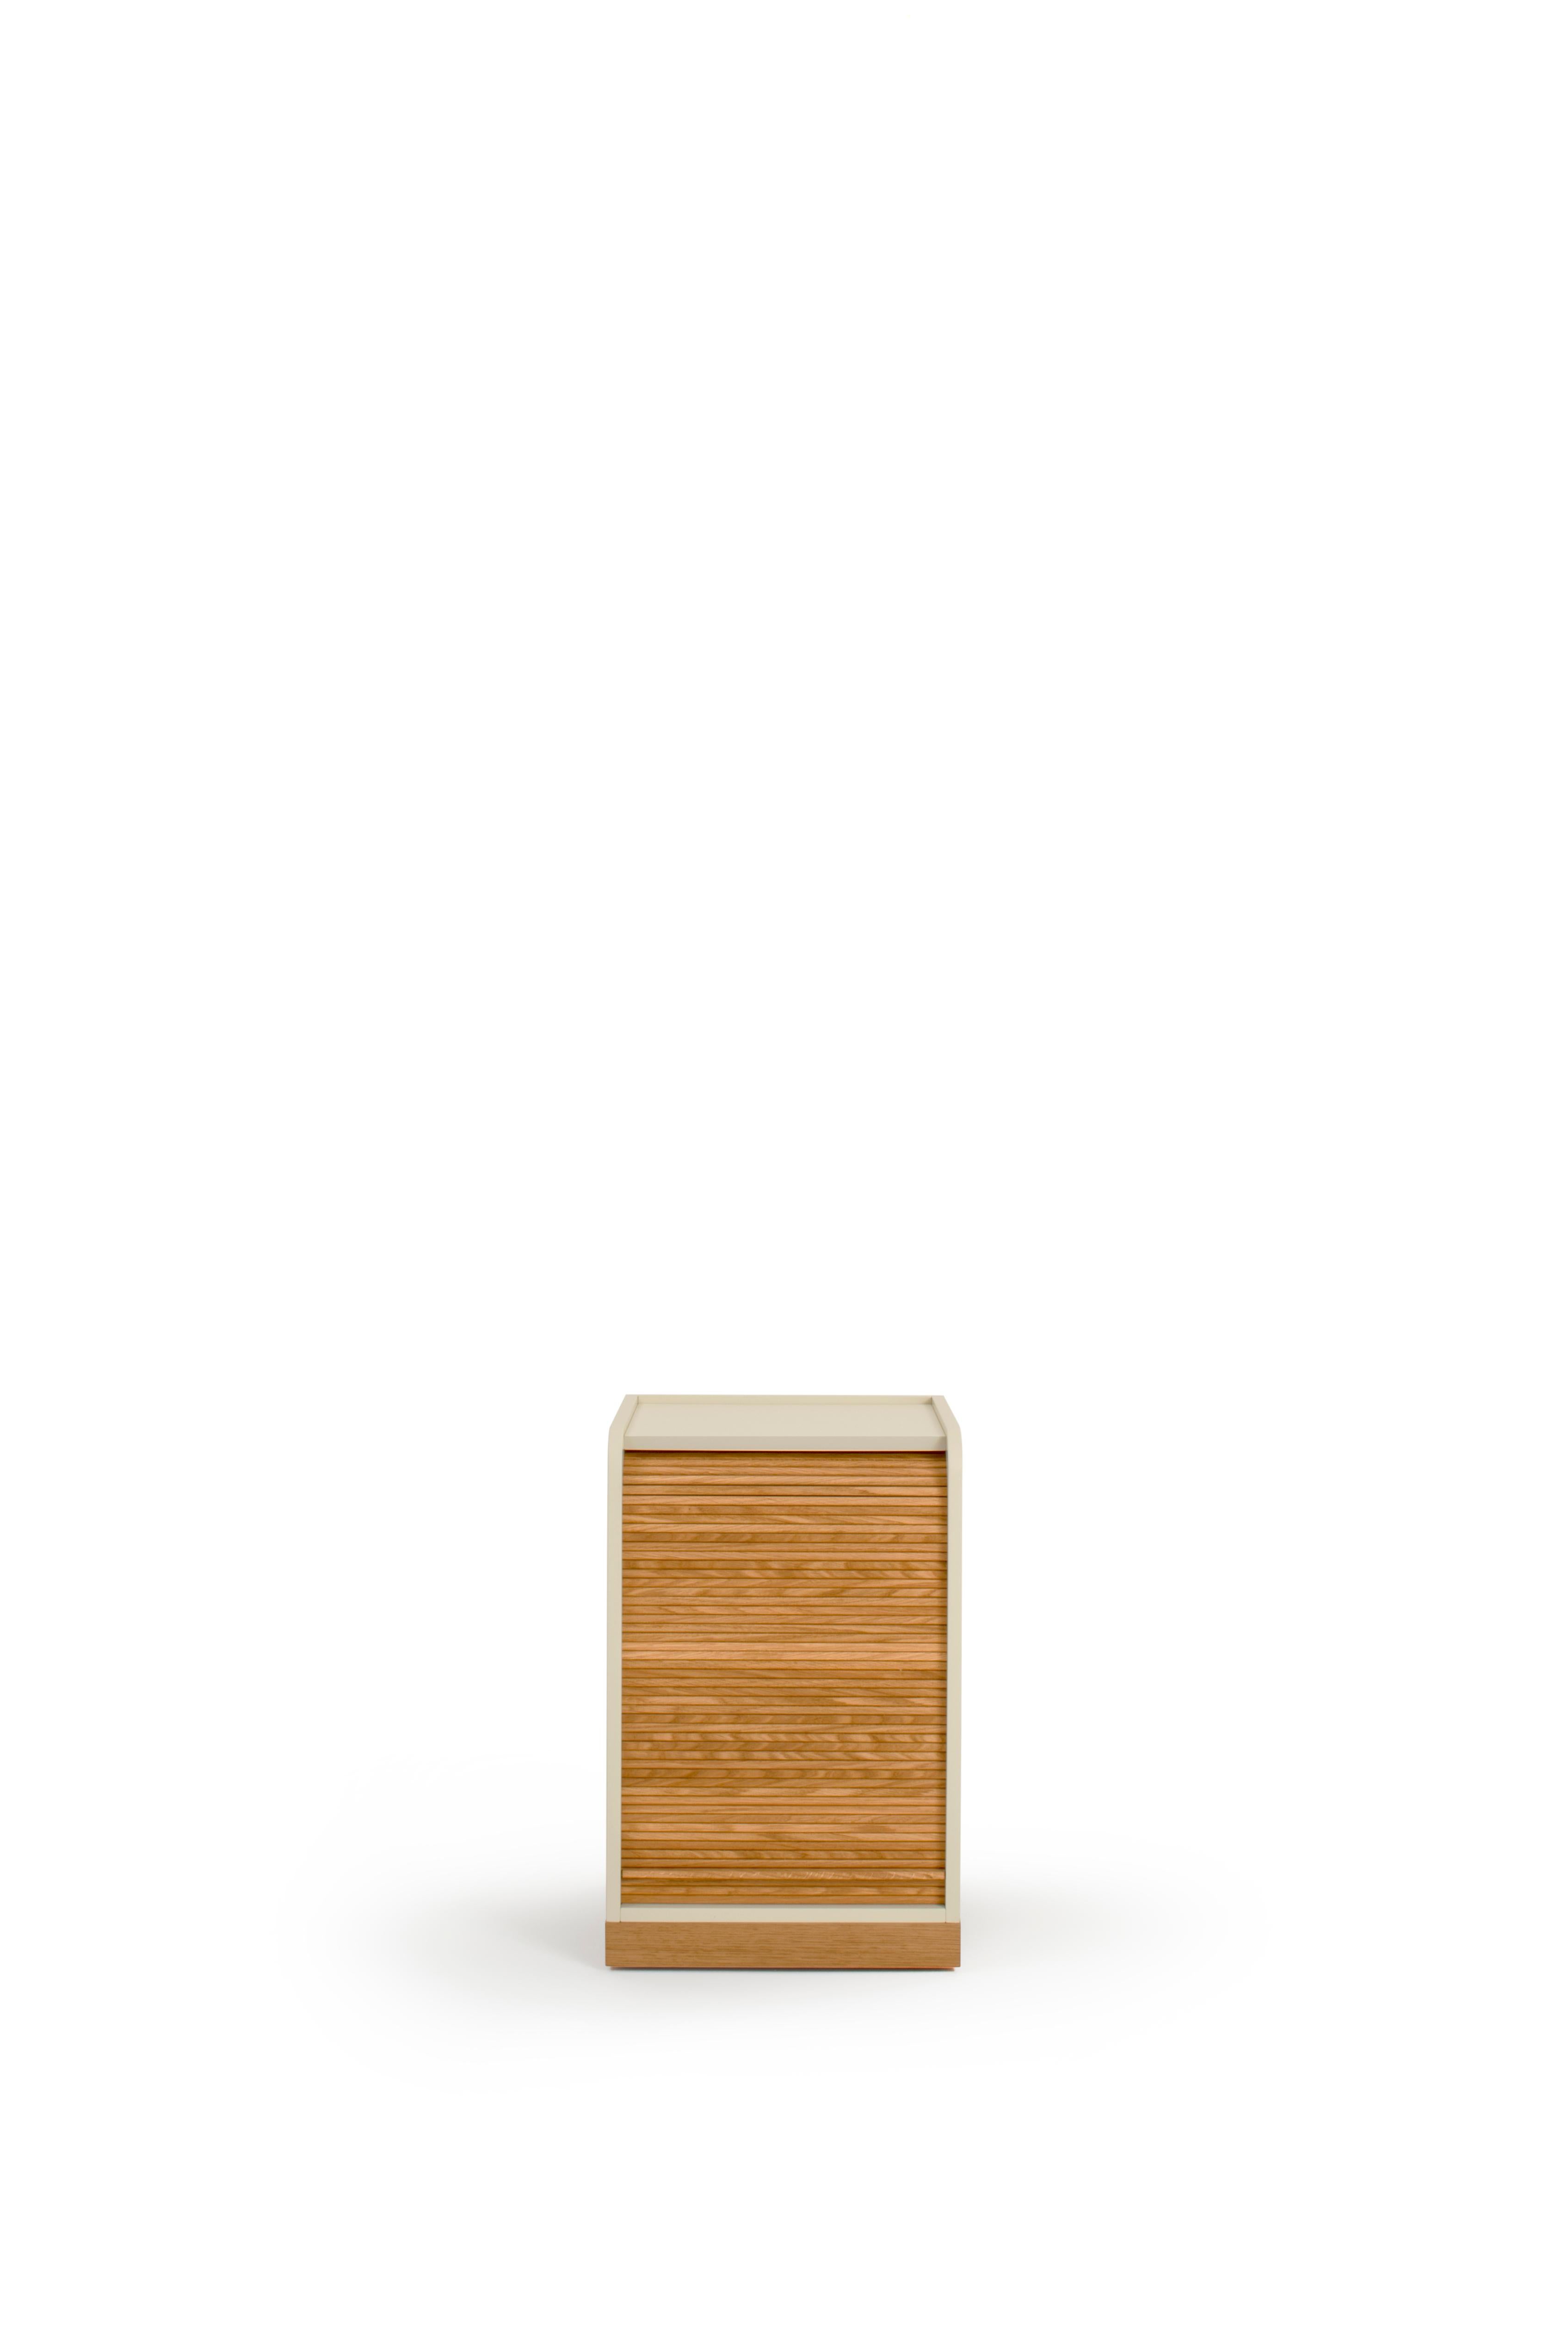 Tapparelle wheels cabinet, sand white by Colé Italia with Emmanuel Gallina
Dimensions: H.55 D.40 W.40 cm.
Materials: Container on wheels with plinth and “tapparella” sliding shutter in solid oak.
Matt lacquered structure; handle in leather; inside 1